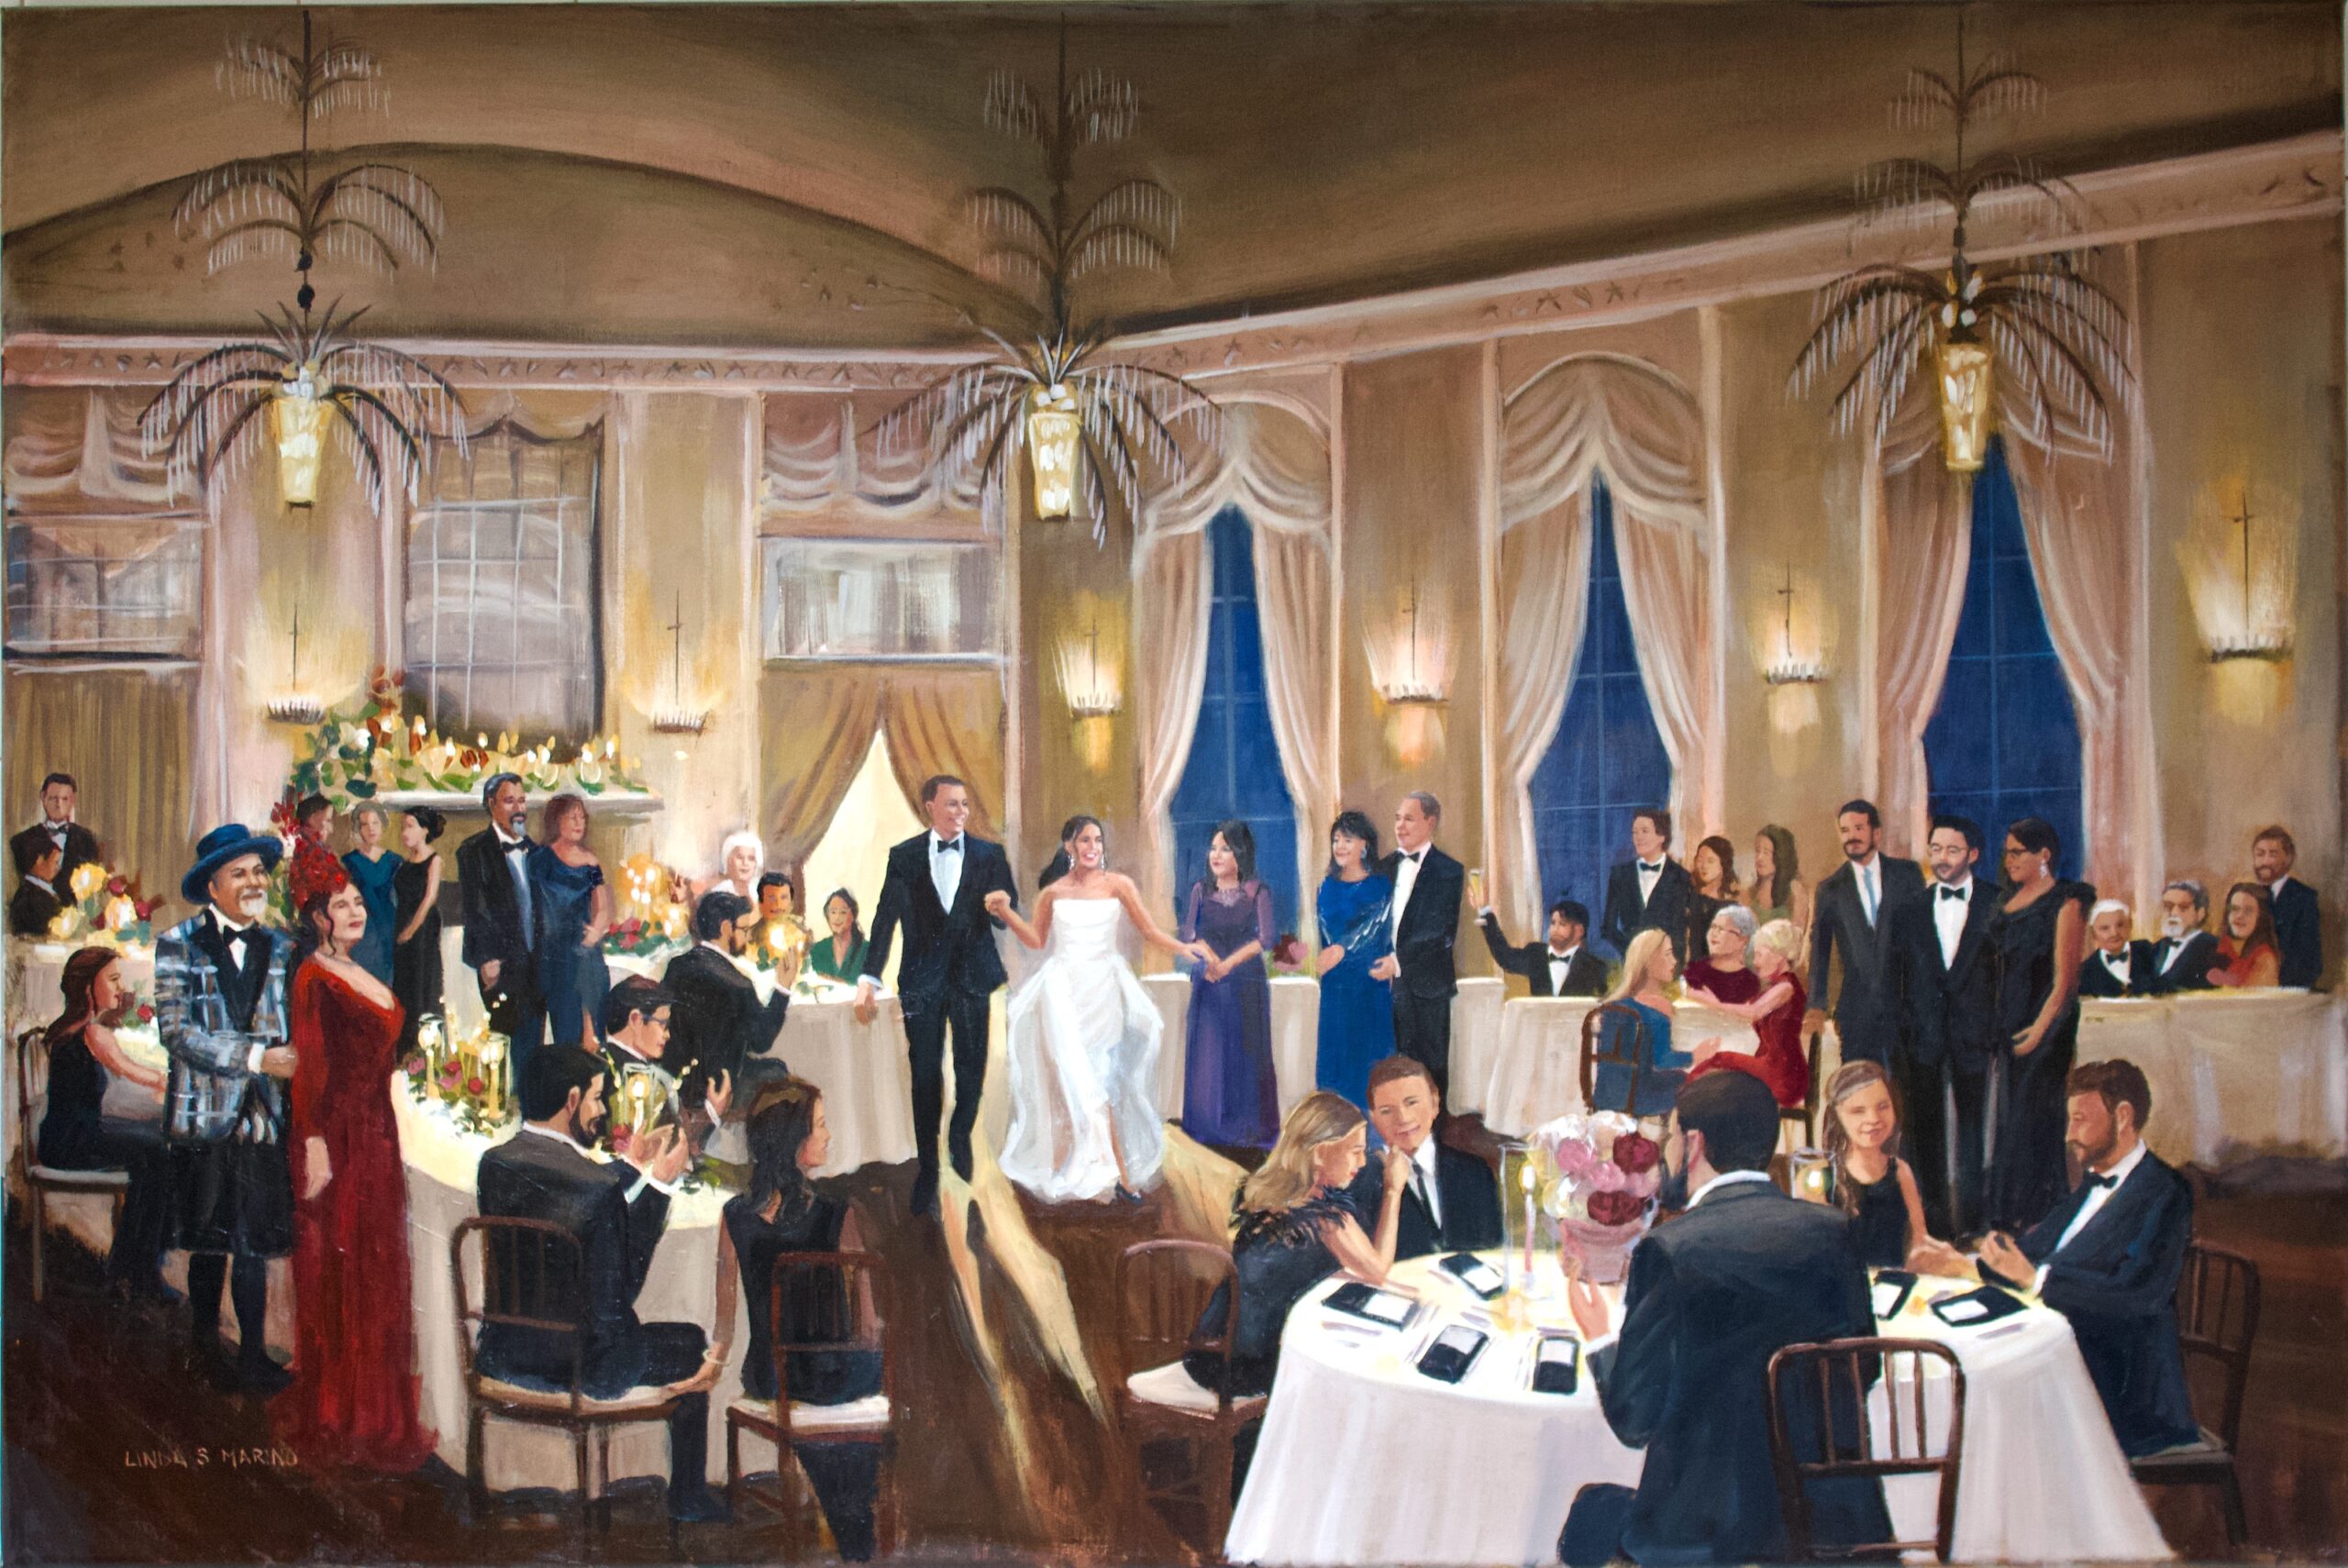 Live wedding painting celebration scene at New Haven lawn Club, by Linda Marino